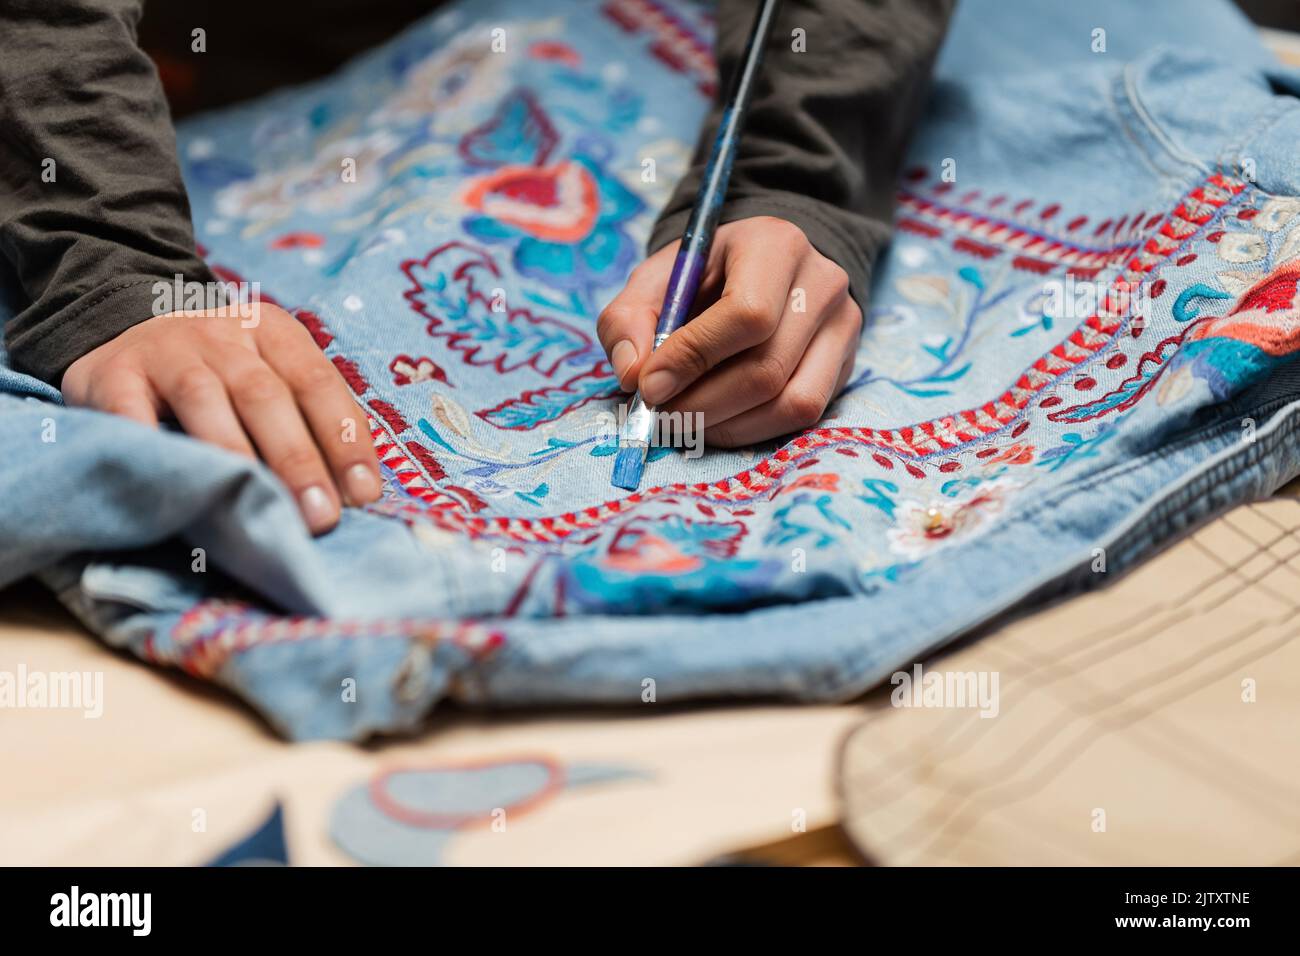 Cropped view of african american designer painting on denim jacket near blurred sewing pattern,stock image Stock Photo